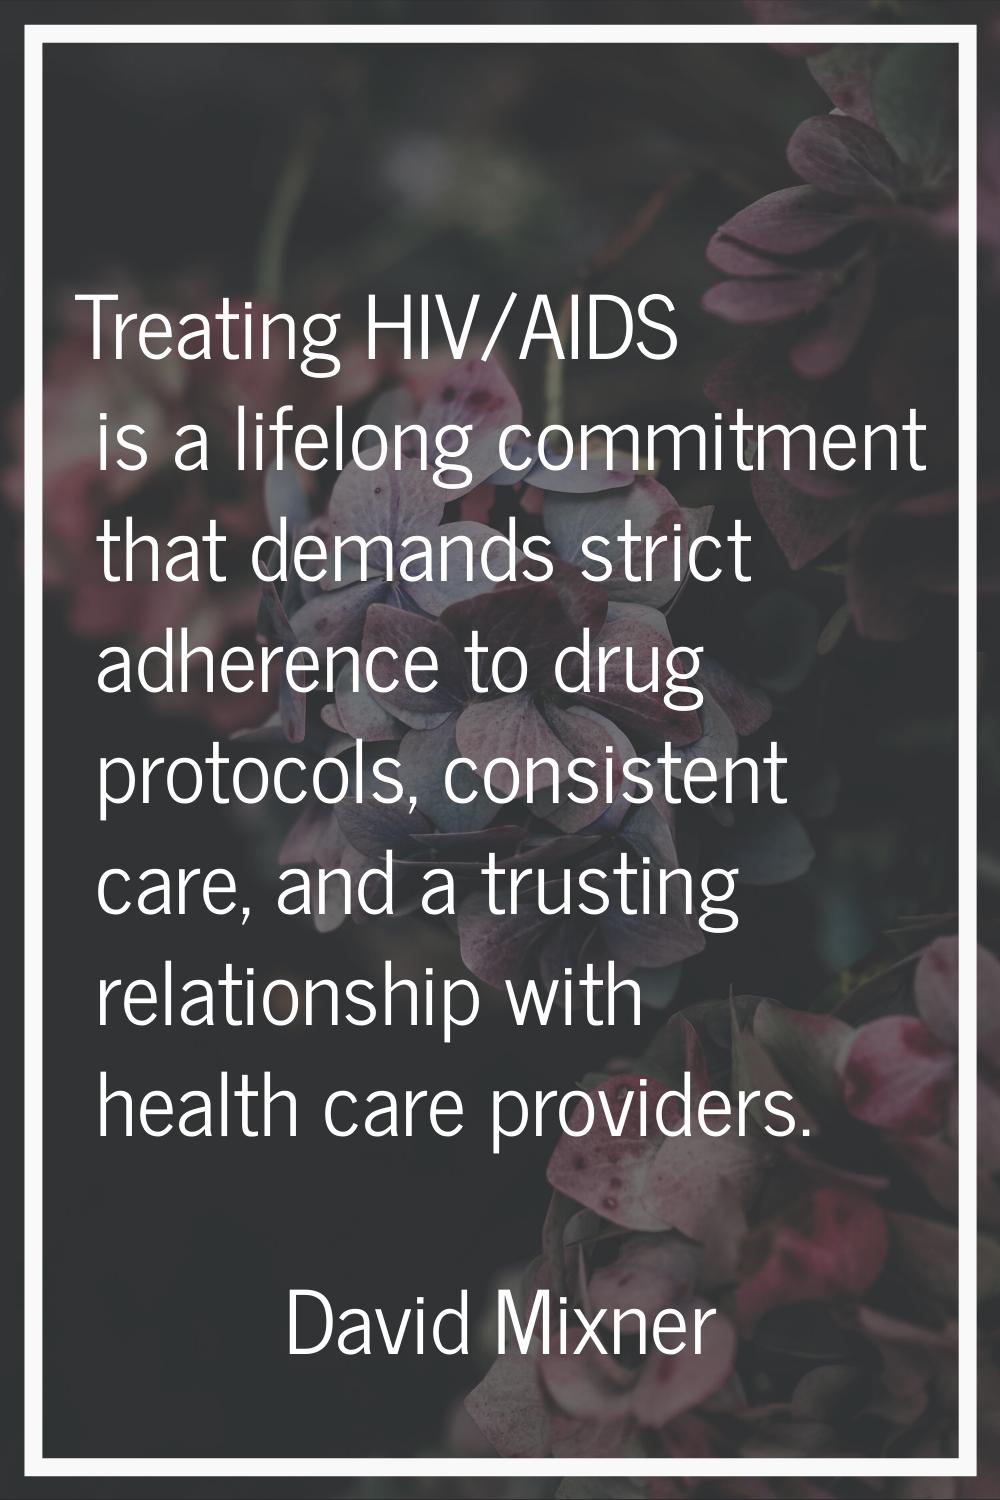 Treating HIV/AIDS is a lifelong commitment that demands strict adherence to drug protocols, consist